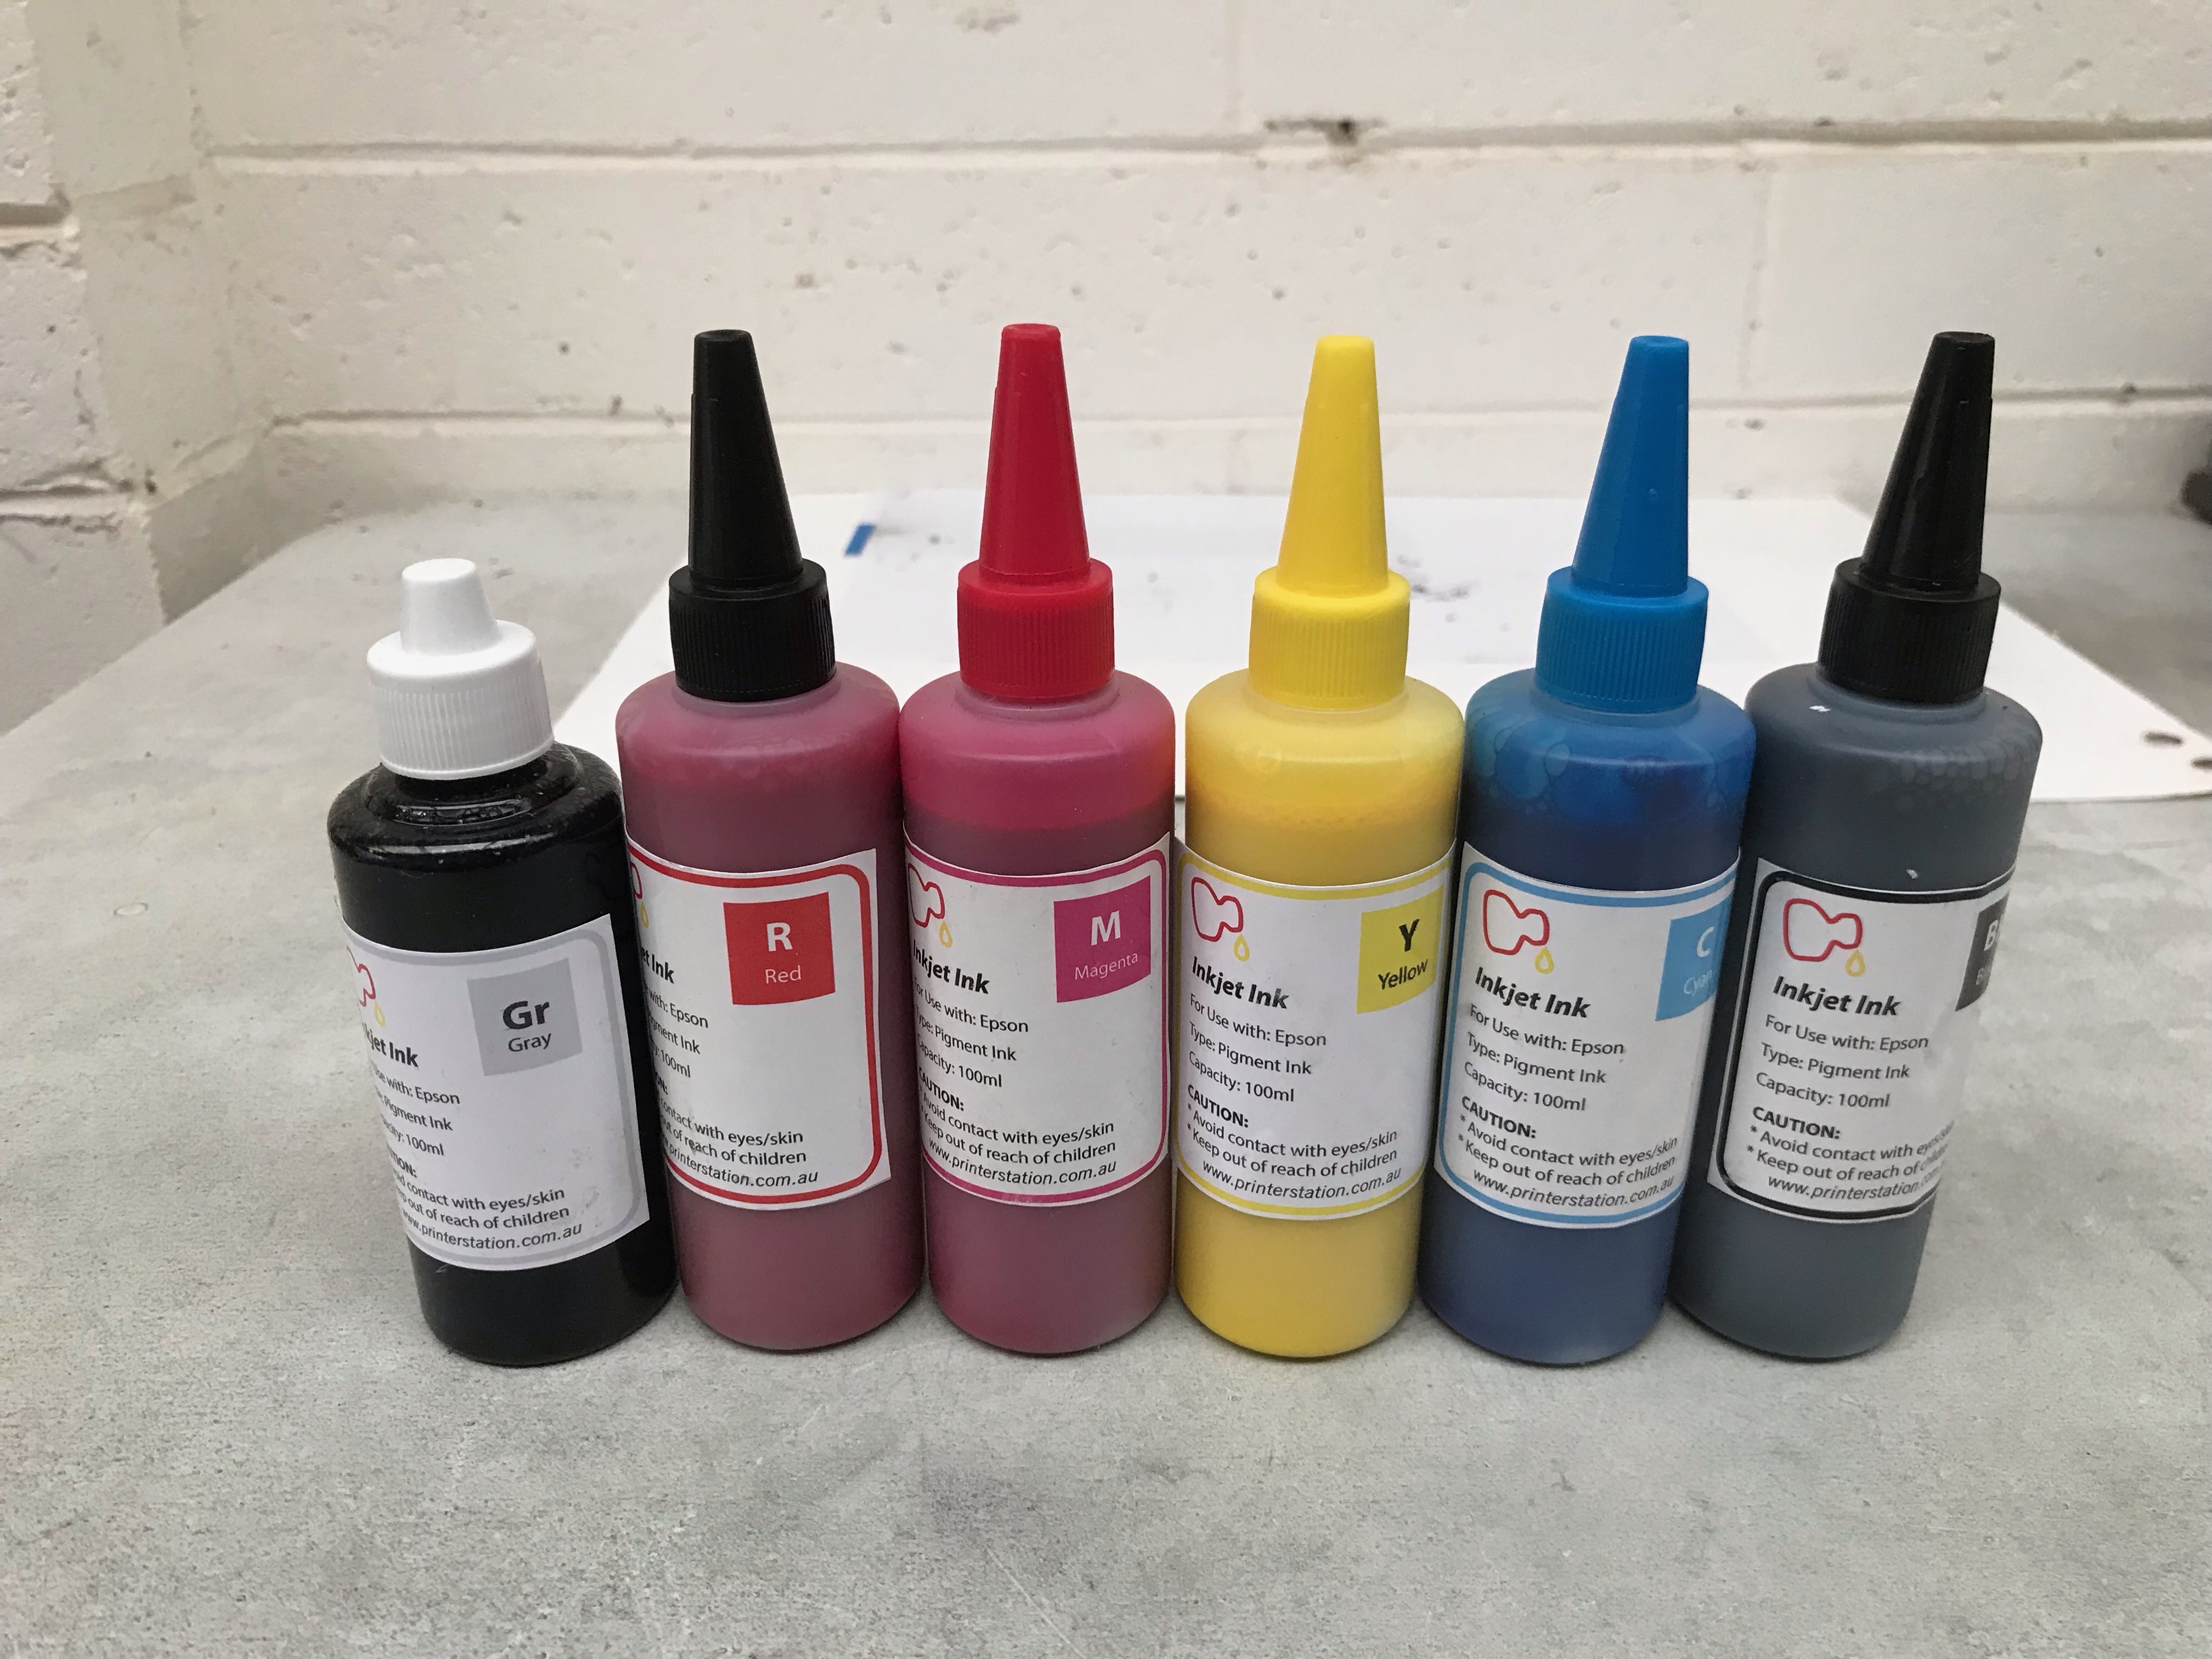 Refill pigment ink for Epson XP15000